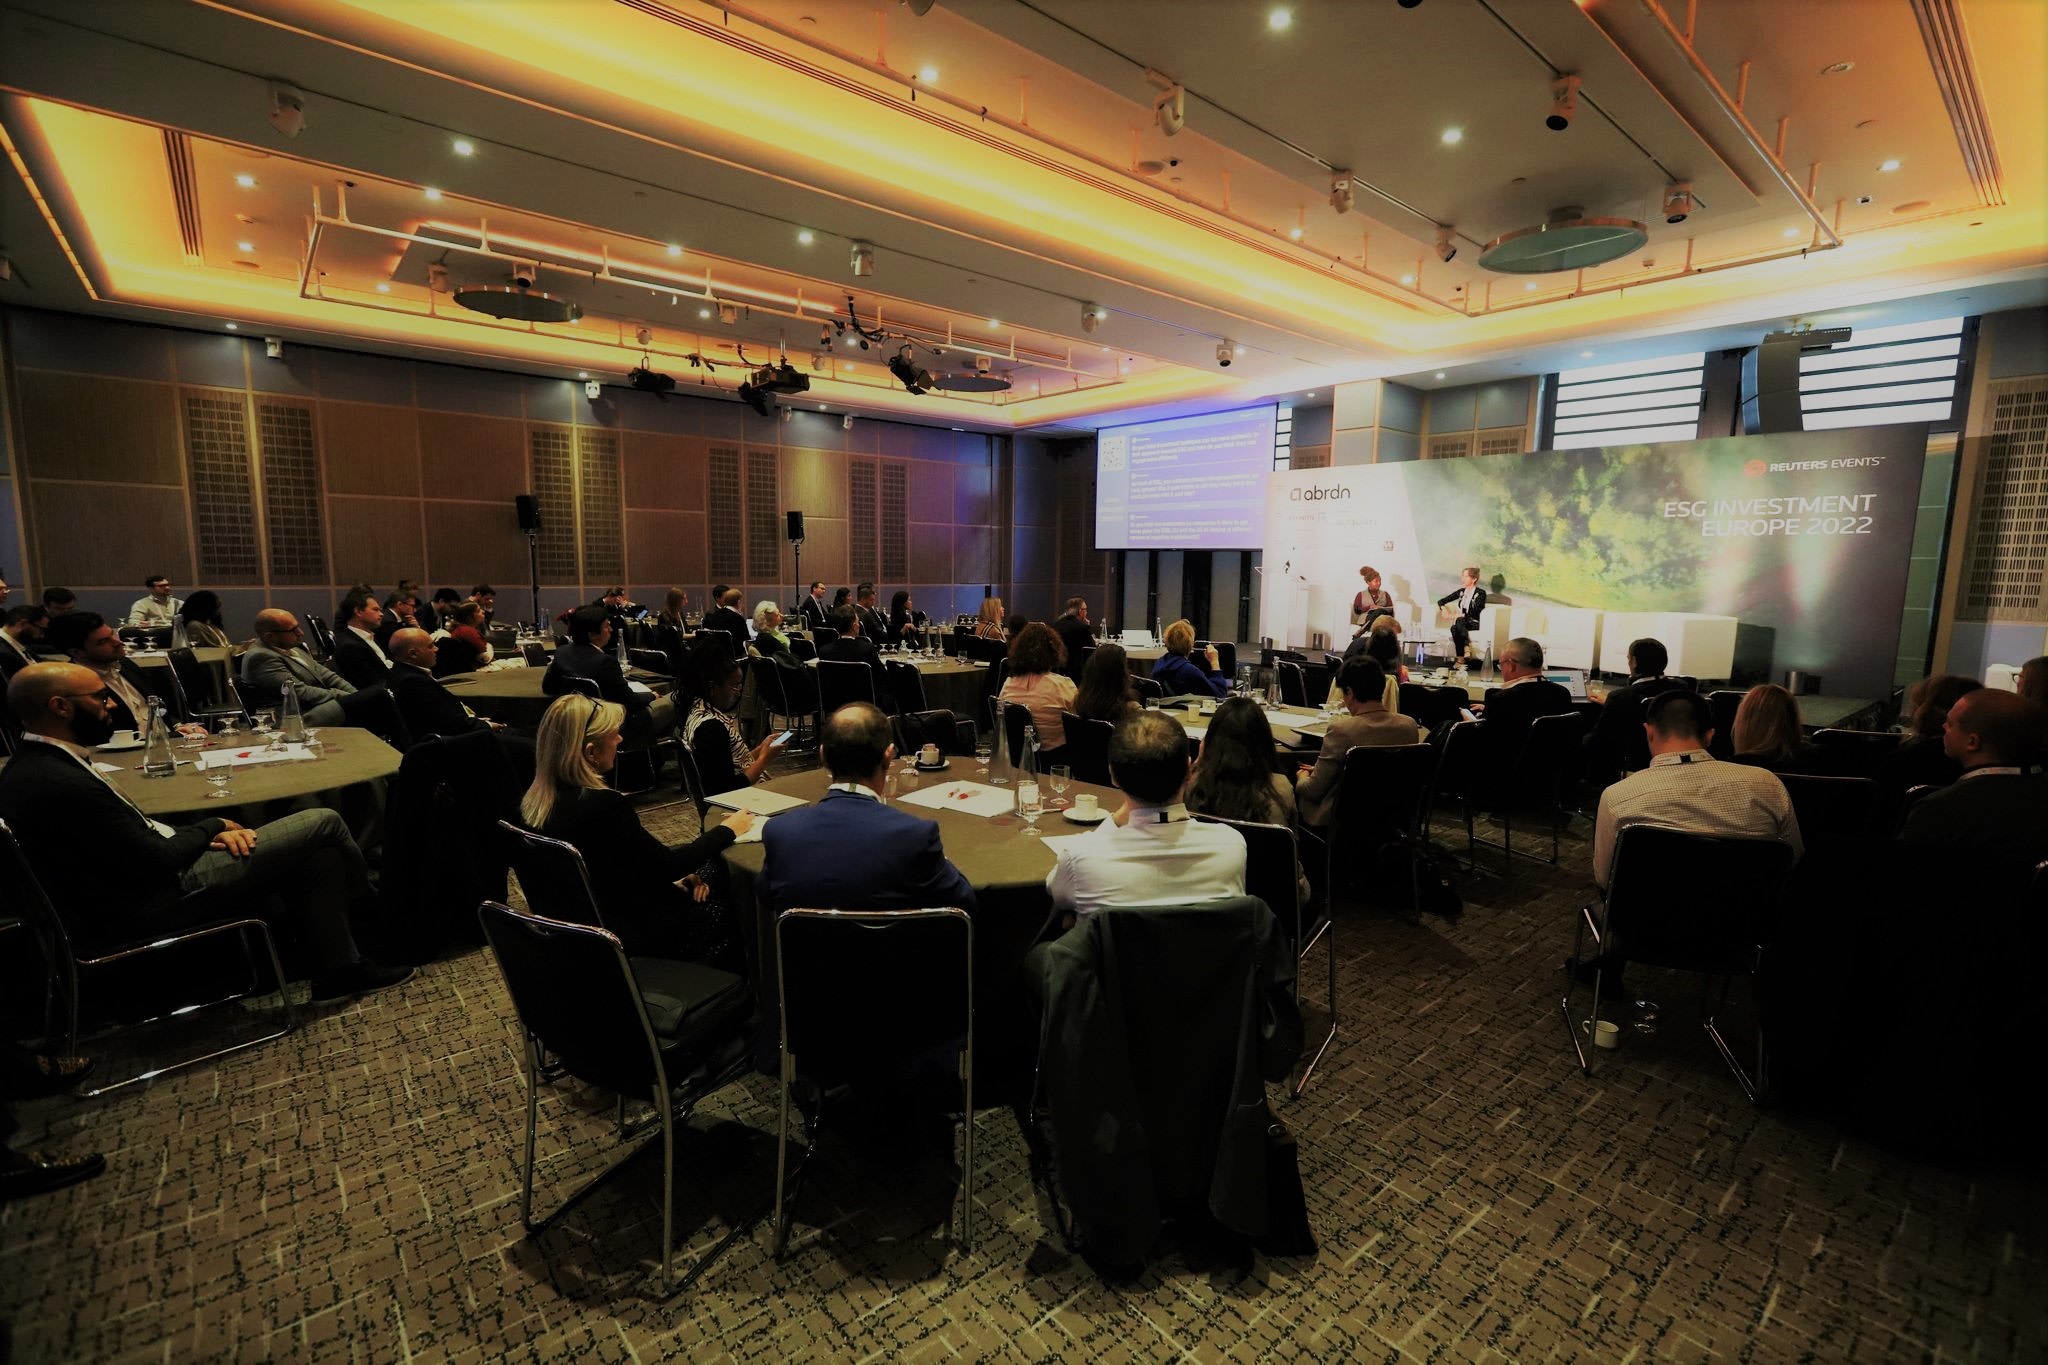 Image of Reuters ESG Investment Europe event, attendees seated listening to keynote speaker